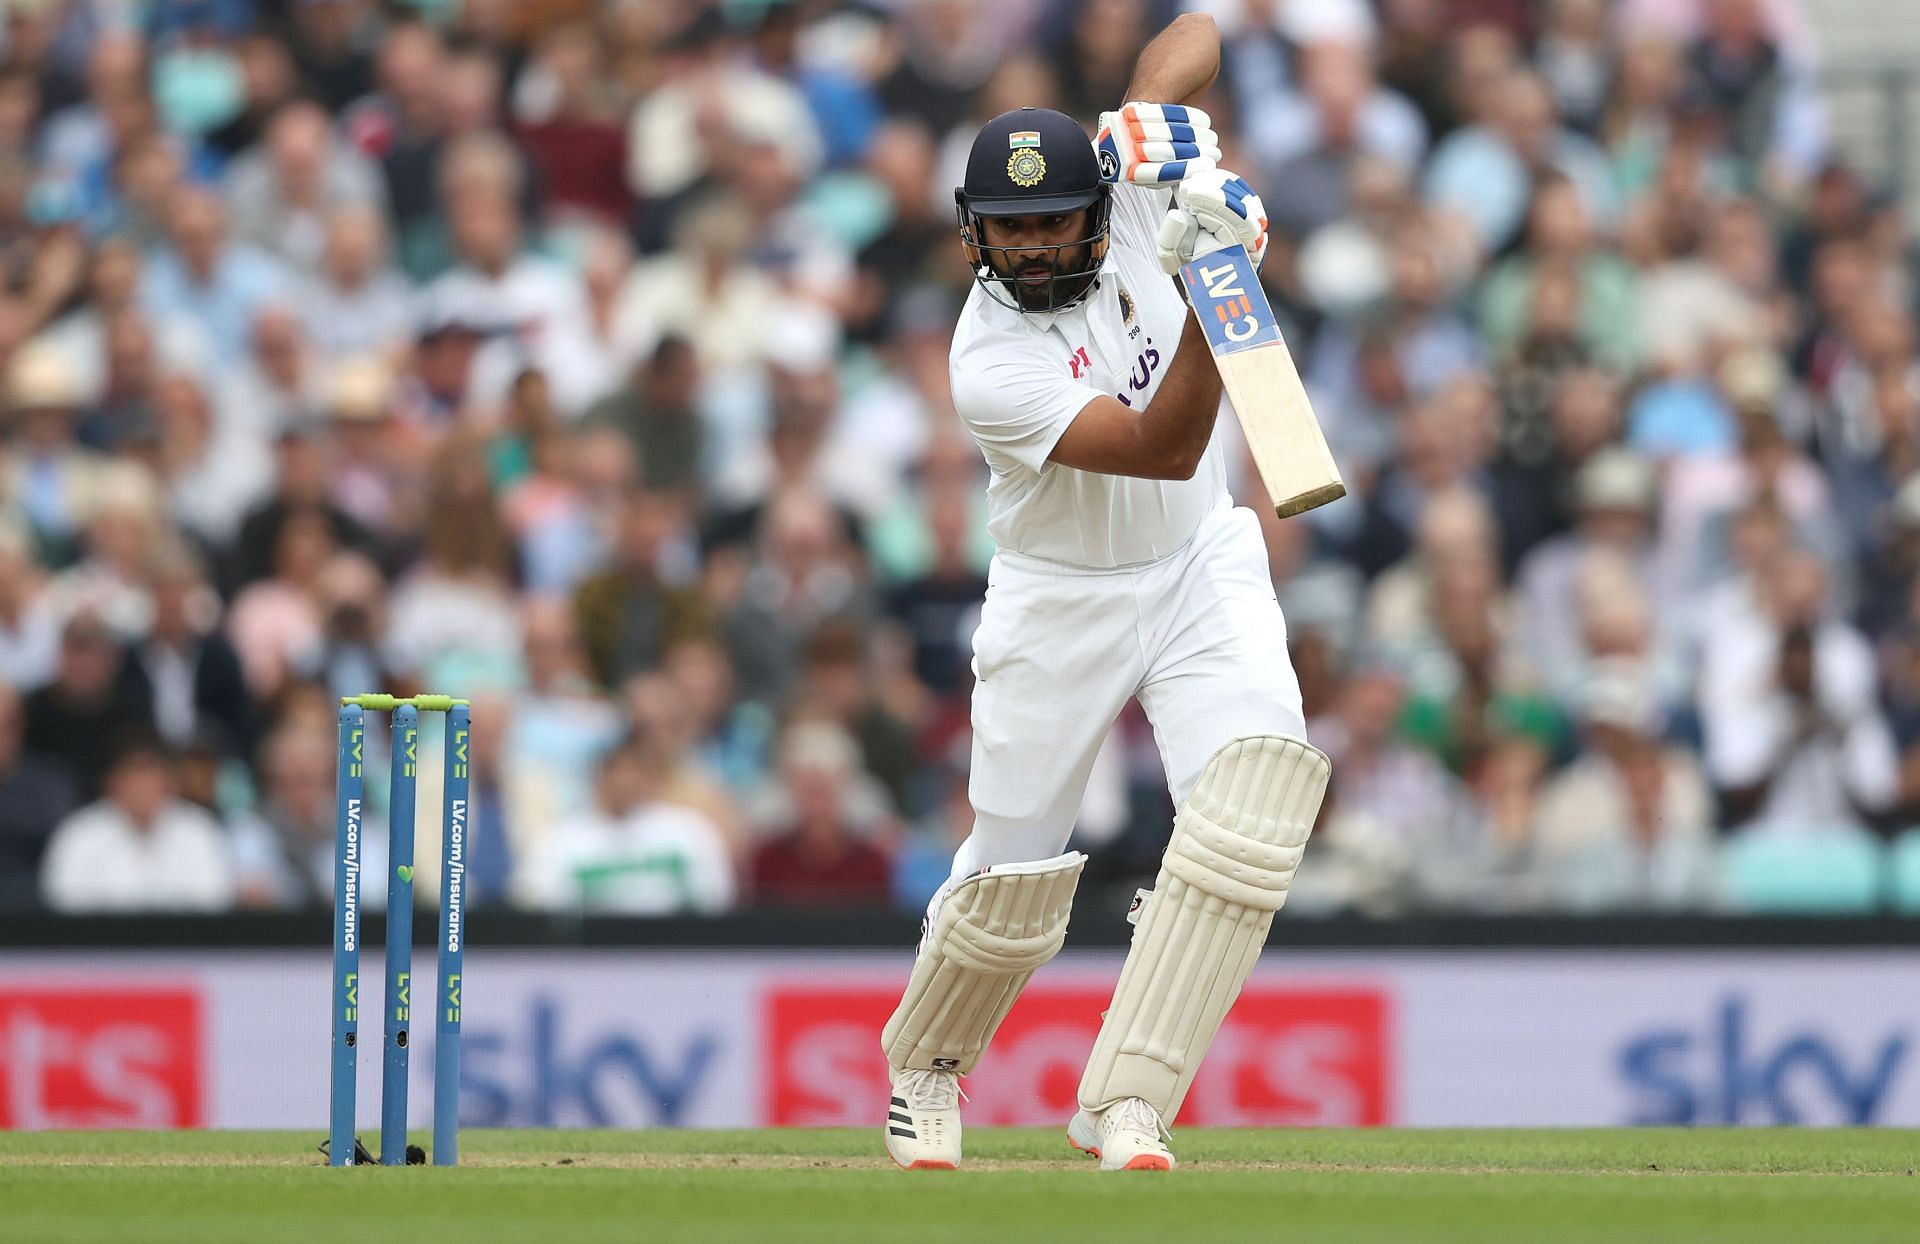 Rohit Sharma was excellent against the new ball in the away series against England.